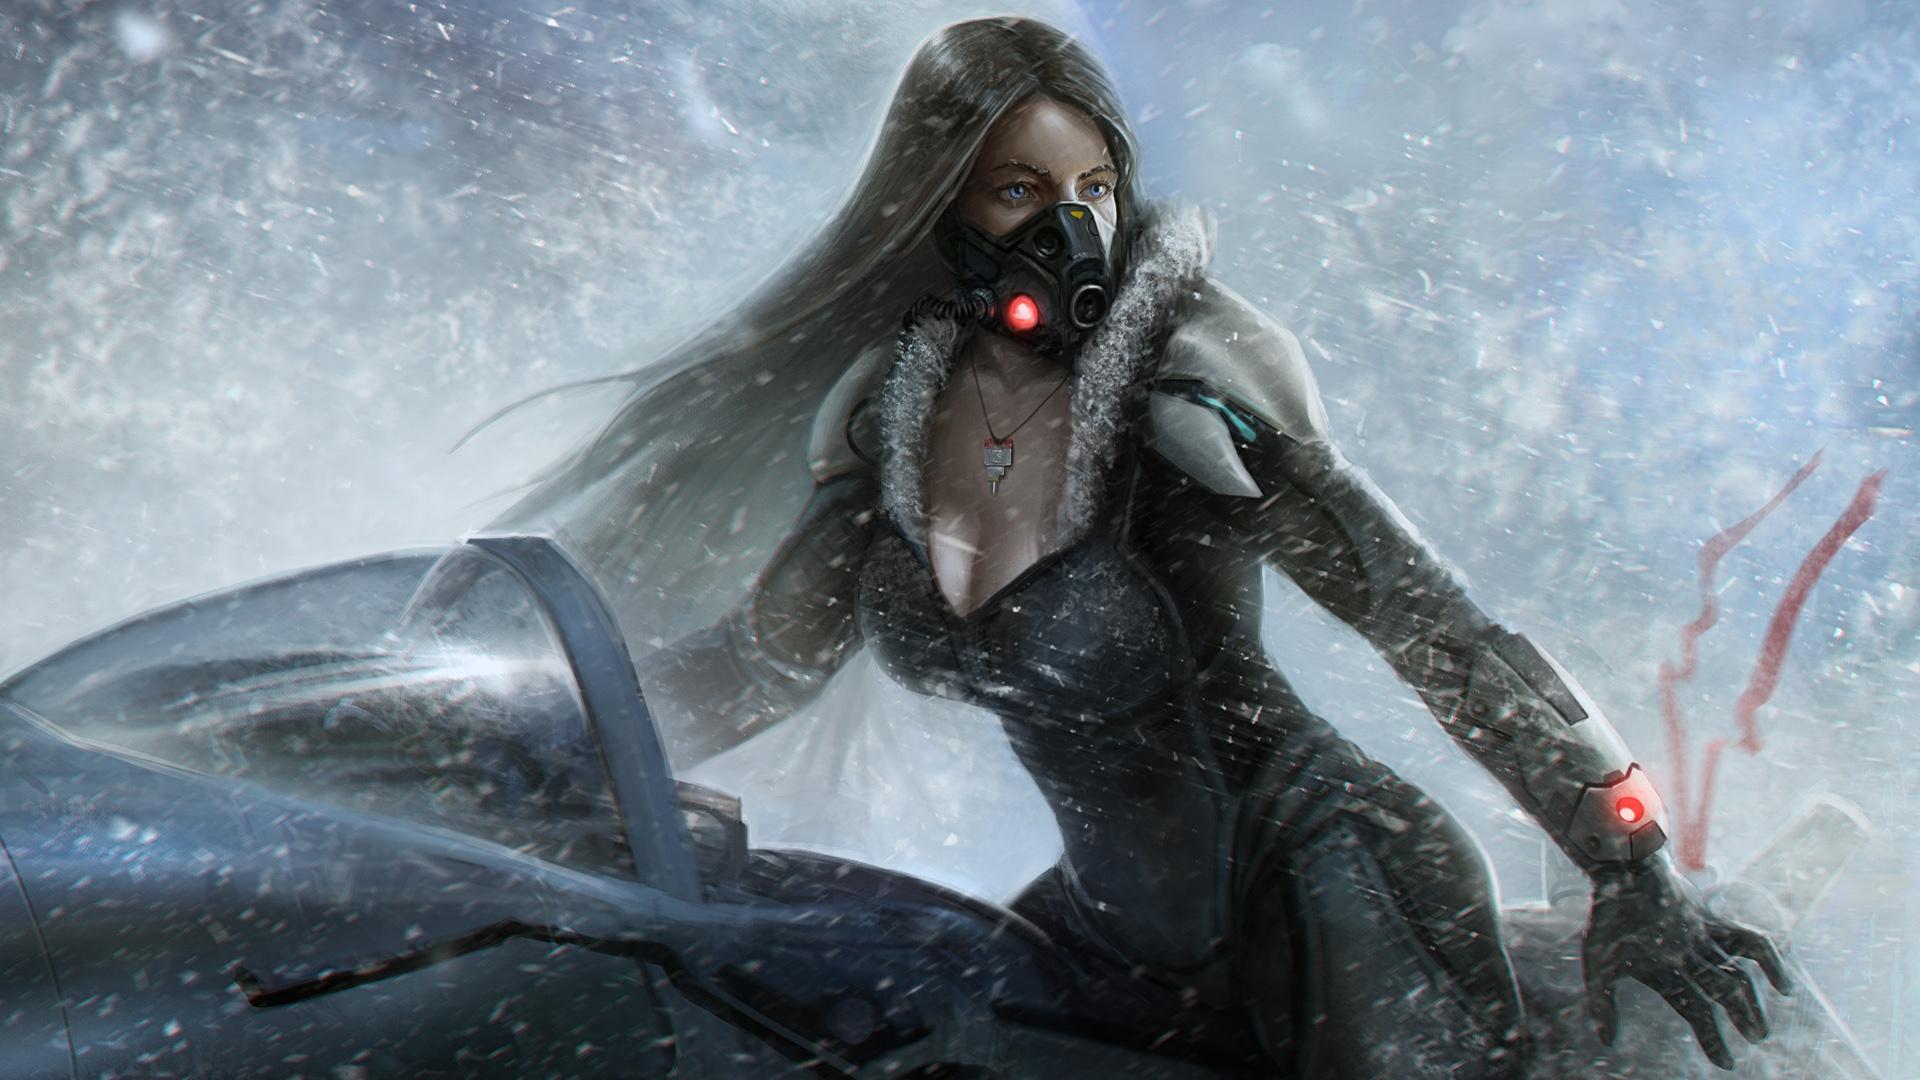 Lost Planet Snow Girl # 2880x1800. All For Desktop